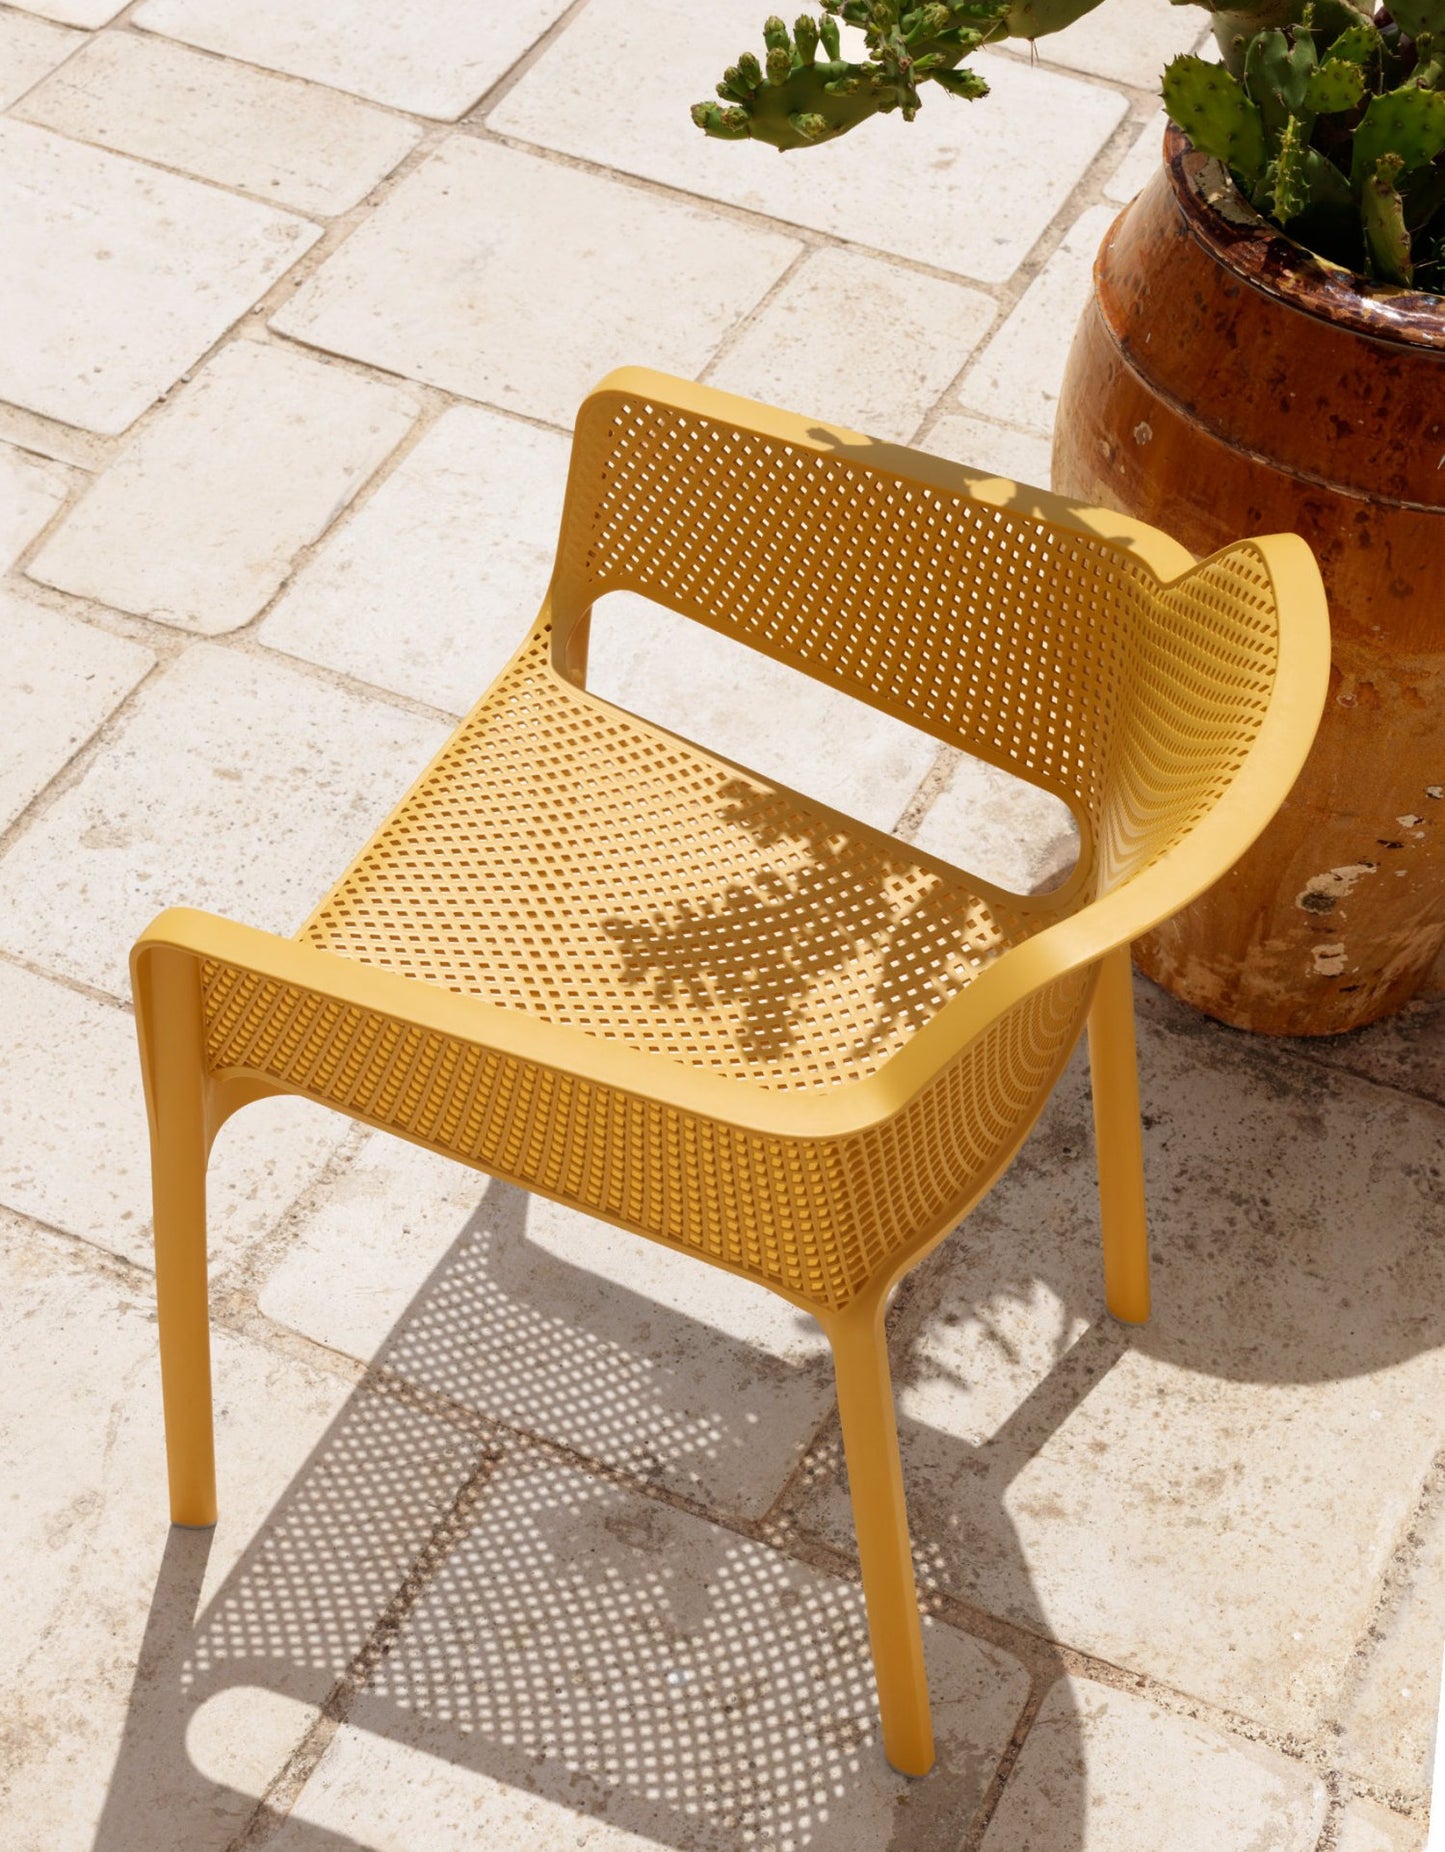 nardi net chair in mustard on a patio with white flag stones beside a rustic red plant pot and cactus